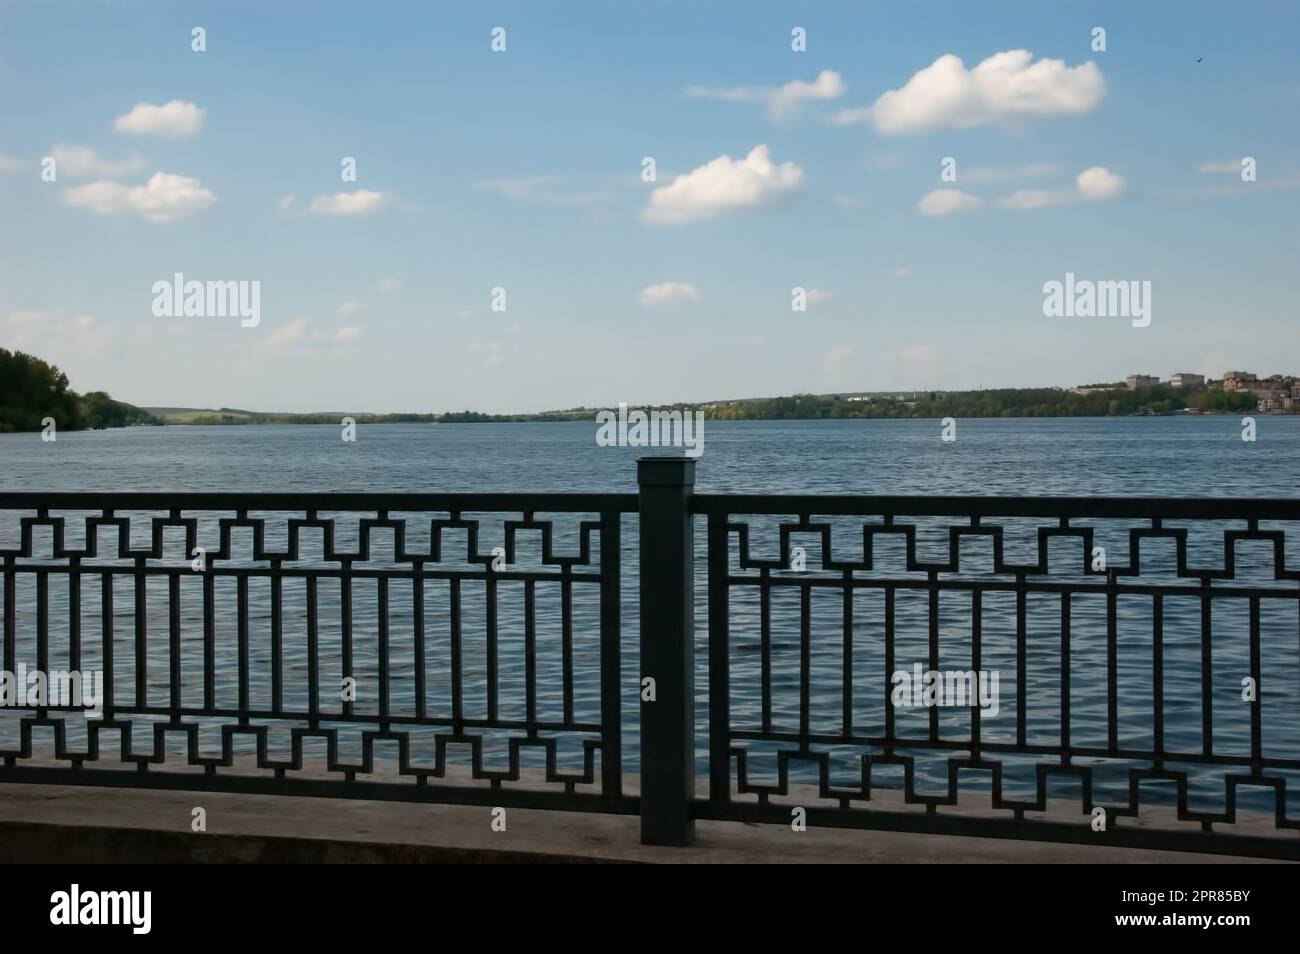 Tranquil lake behind a metal fence, blue sky with white clouds, houses in the distance Stock Photo